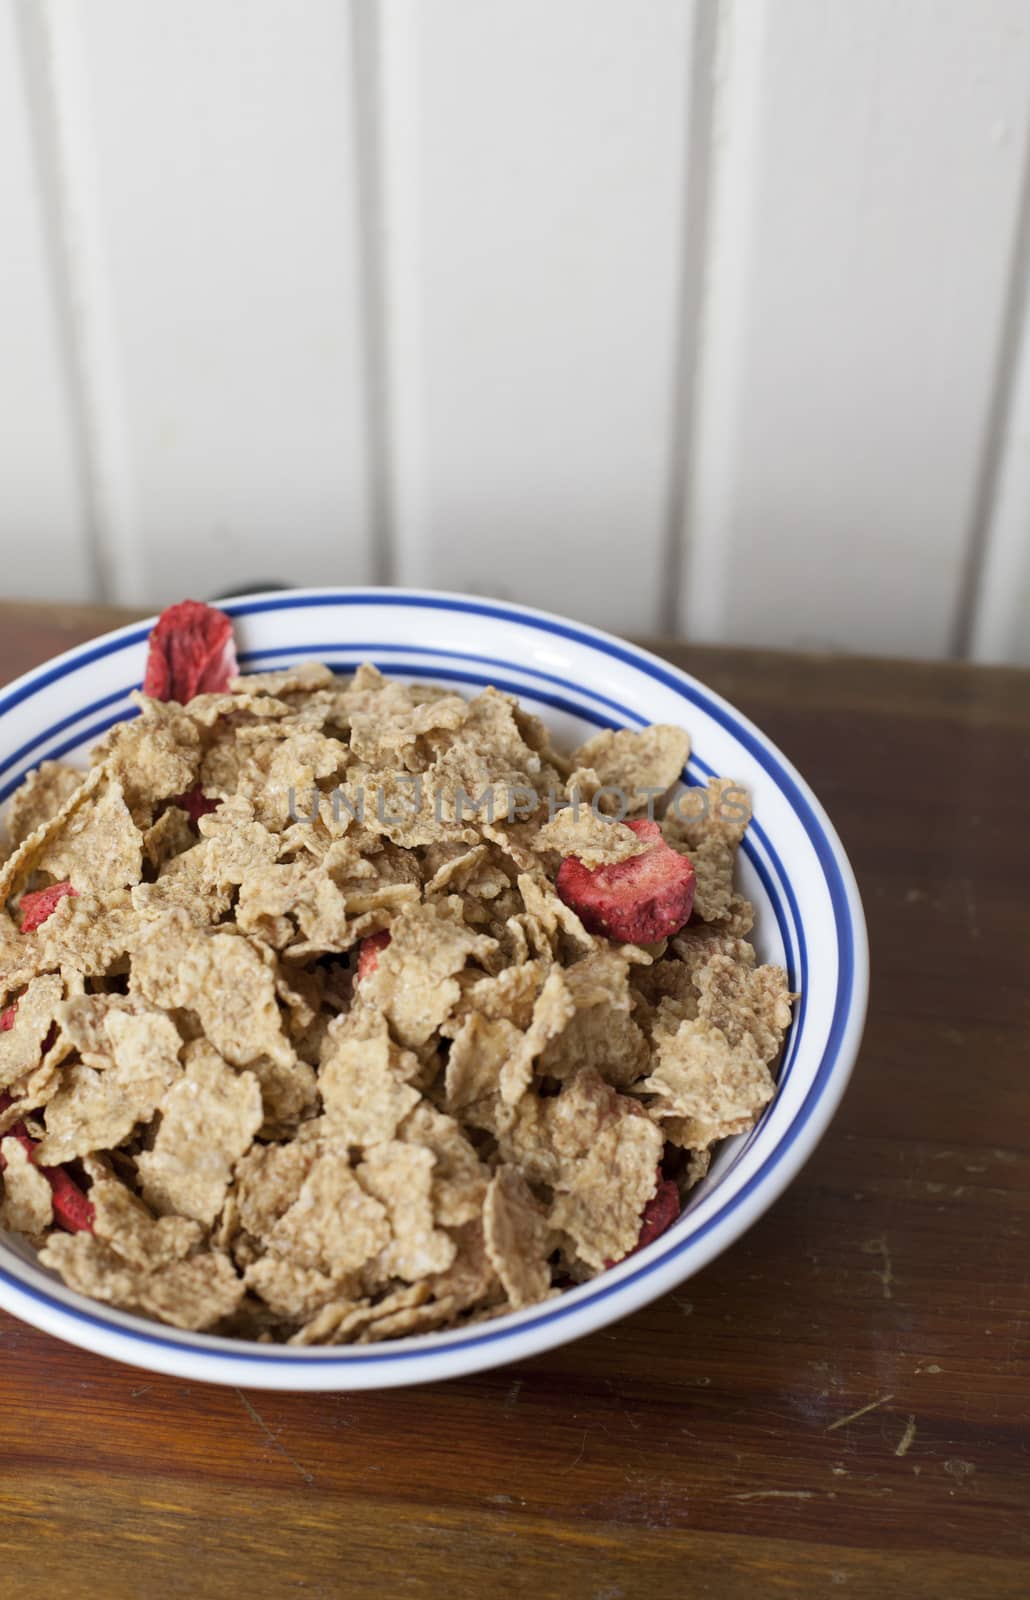 Dry corn flakes with sliced strawberries mixed in